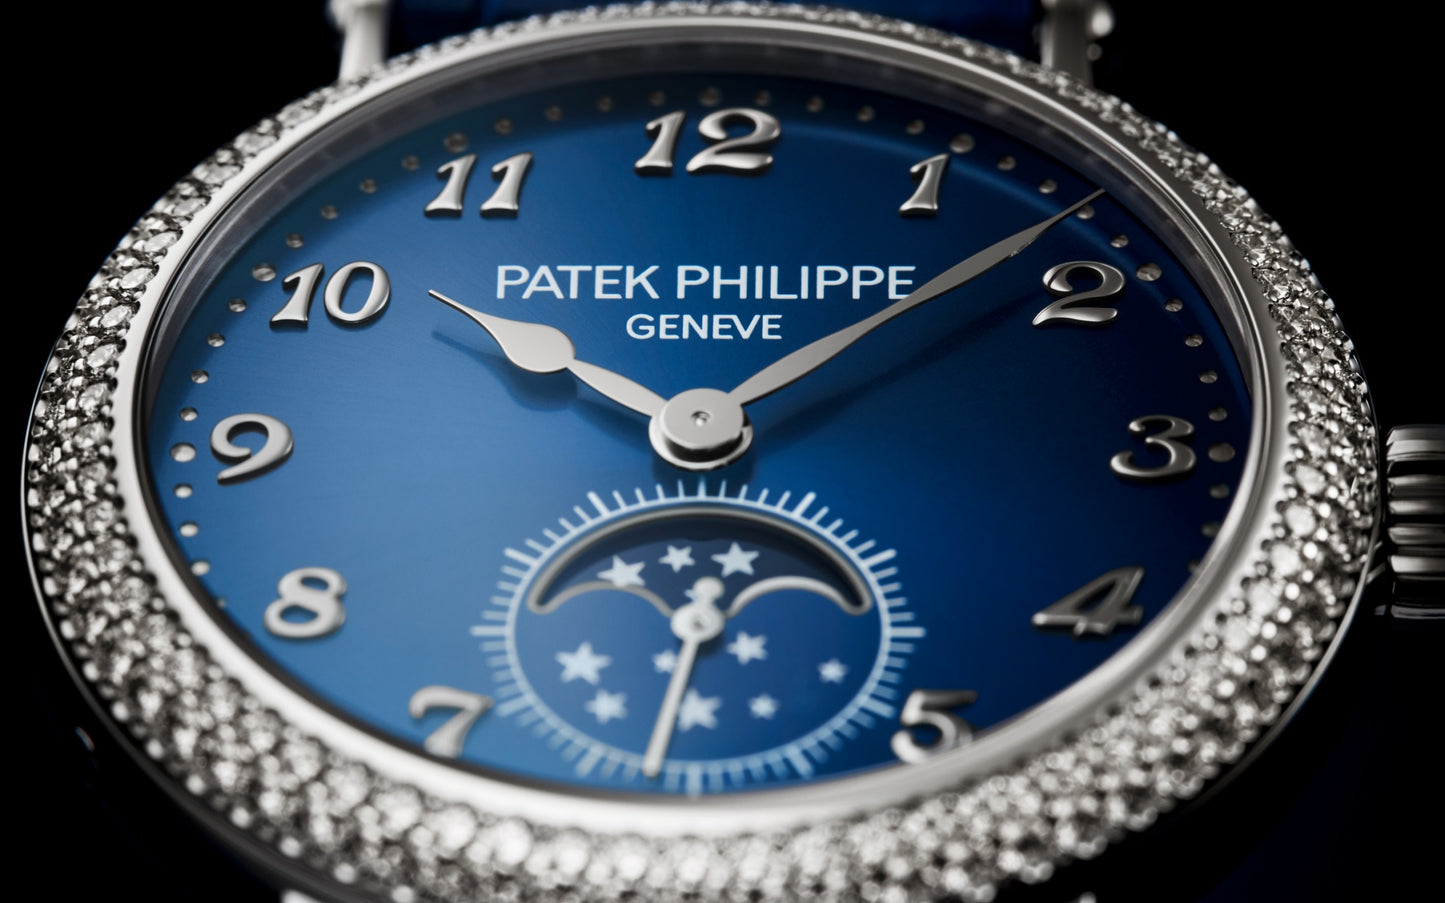 Patek Philippe Complication Moon Phases, 18k White Gold with 132 (~1.09 cts.) brilliant-cut diamonds, 33mm, Ref# 7121/200G-001, Hands